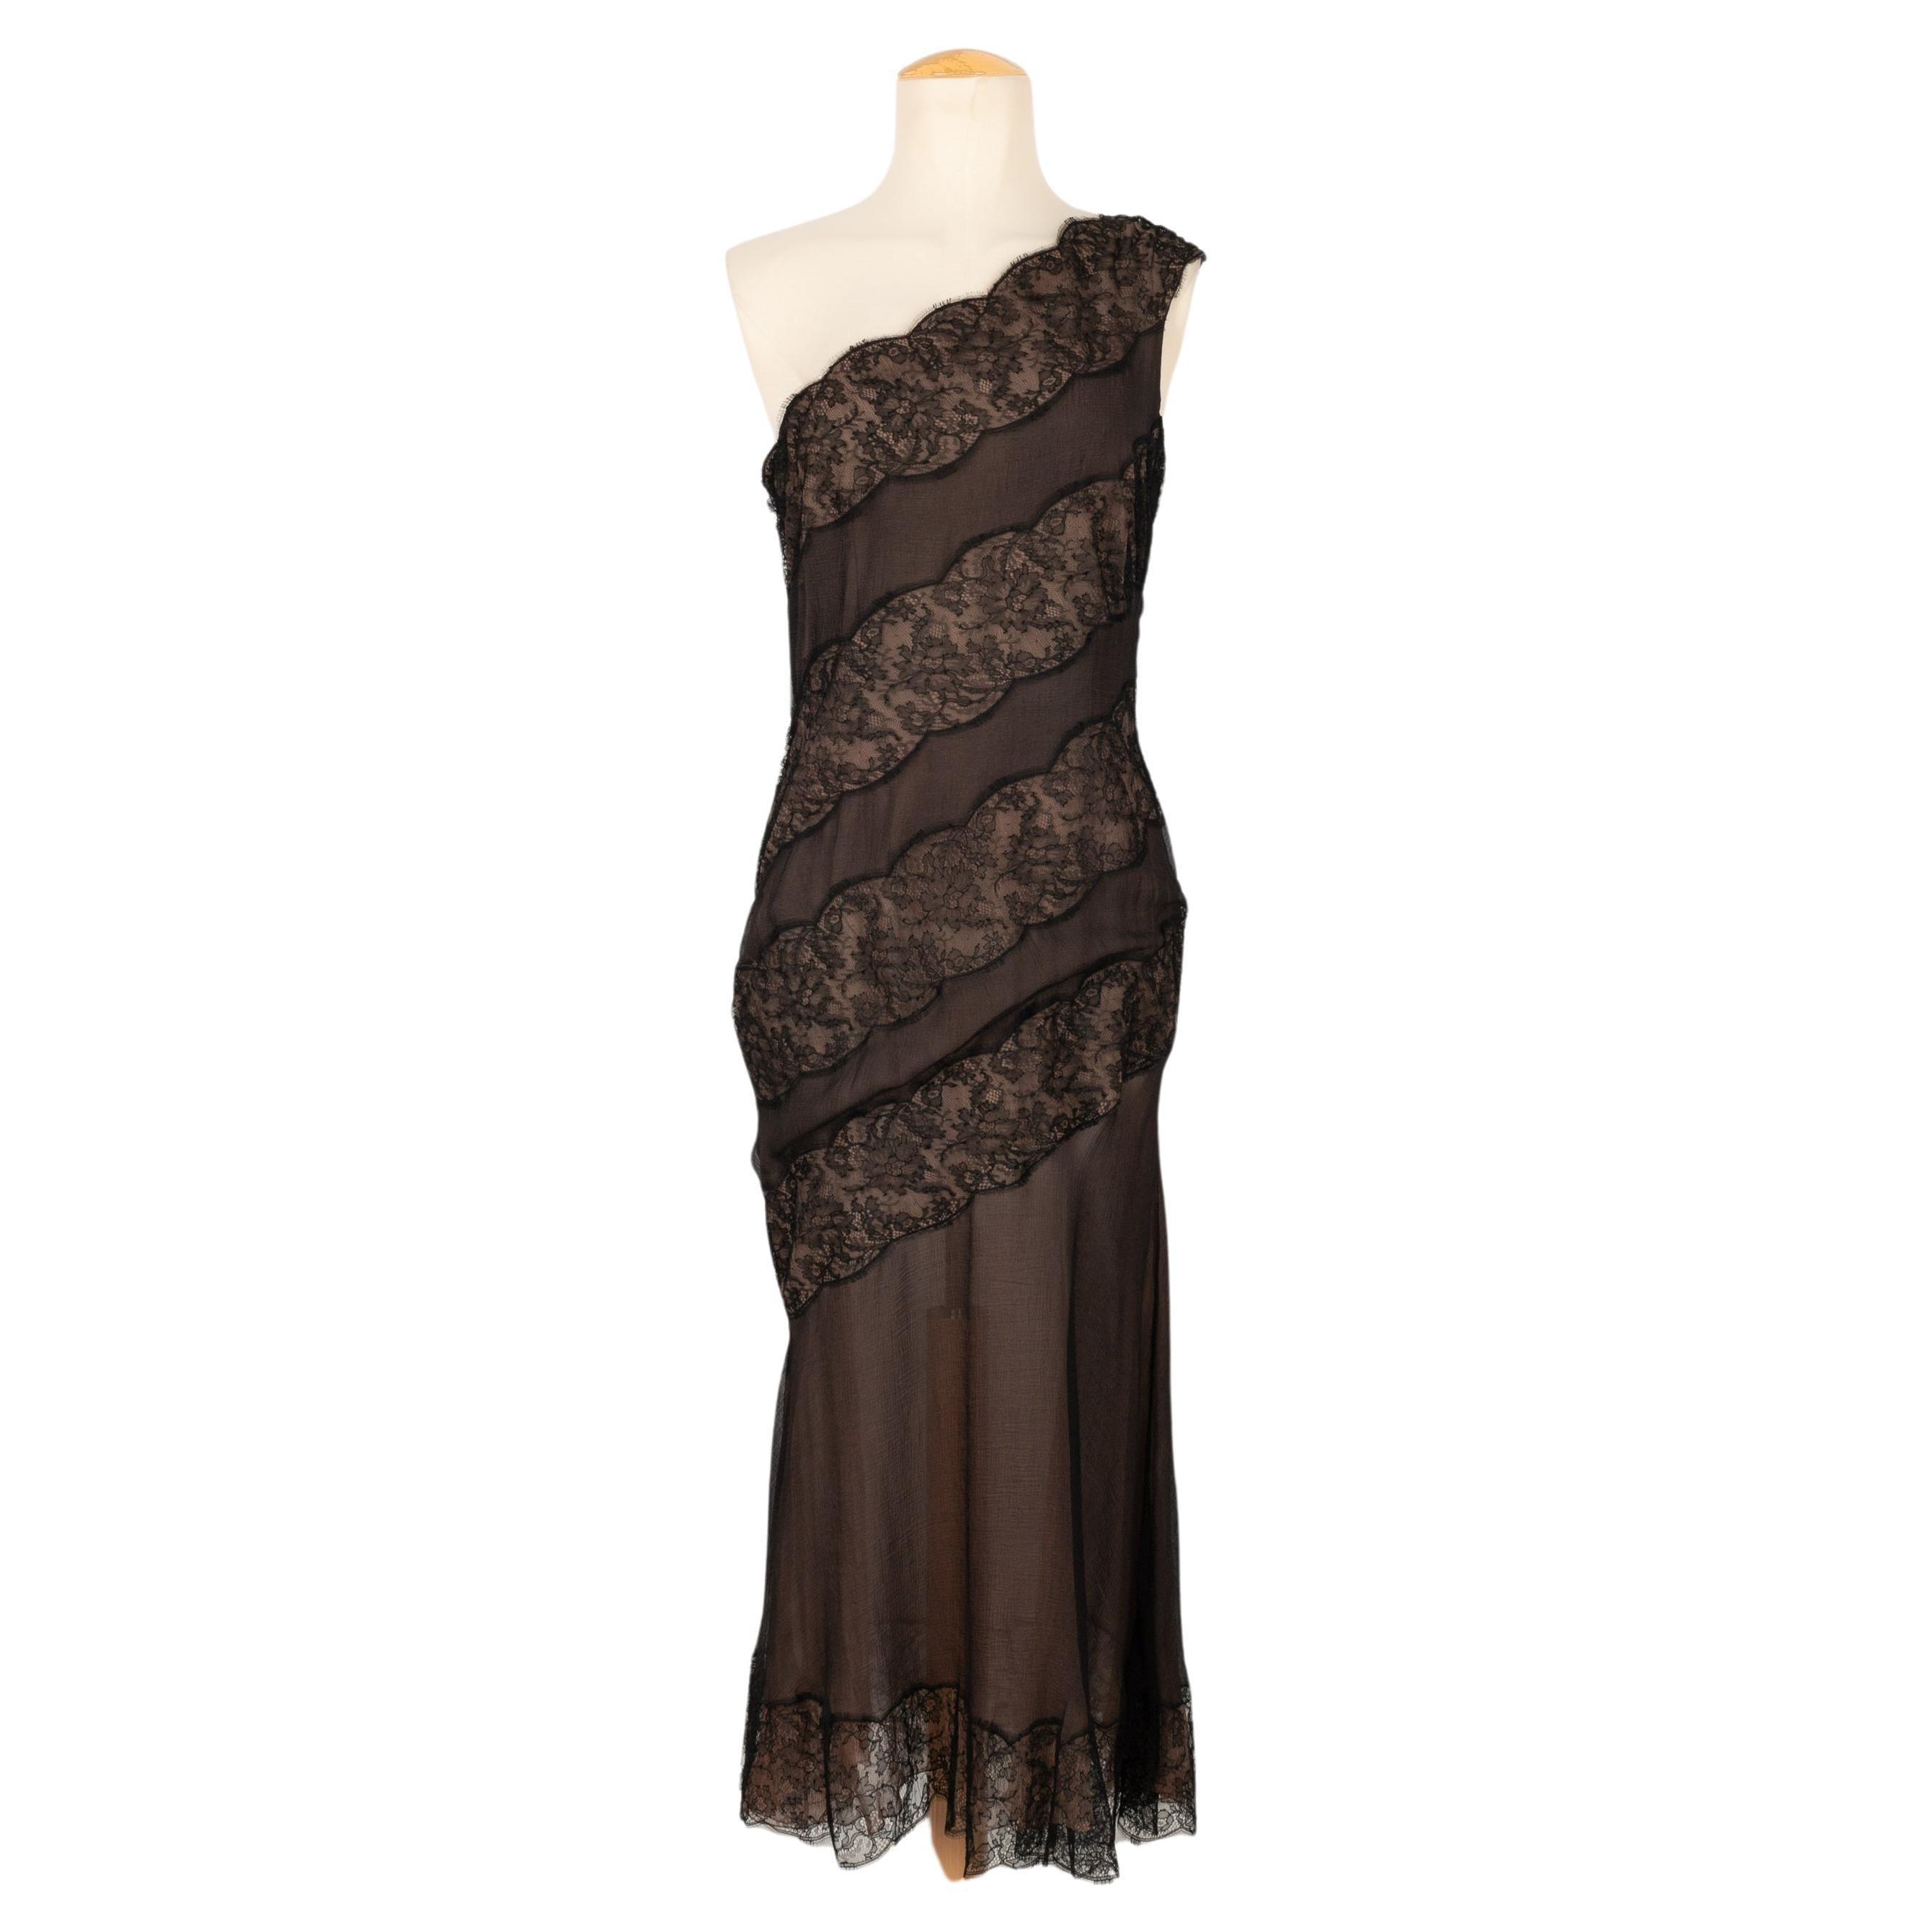 Balmain Couture Dress in Silk Crepe and Transparent Black Lace, circa 1990s